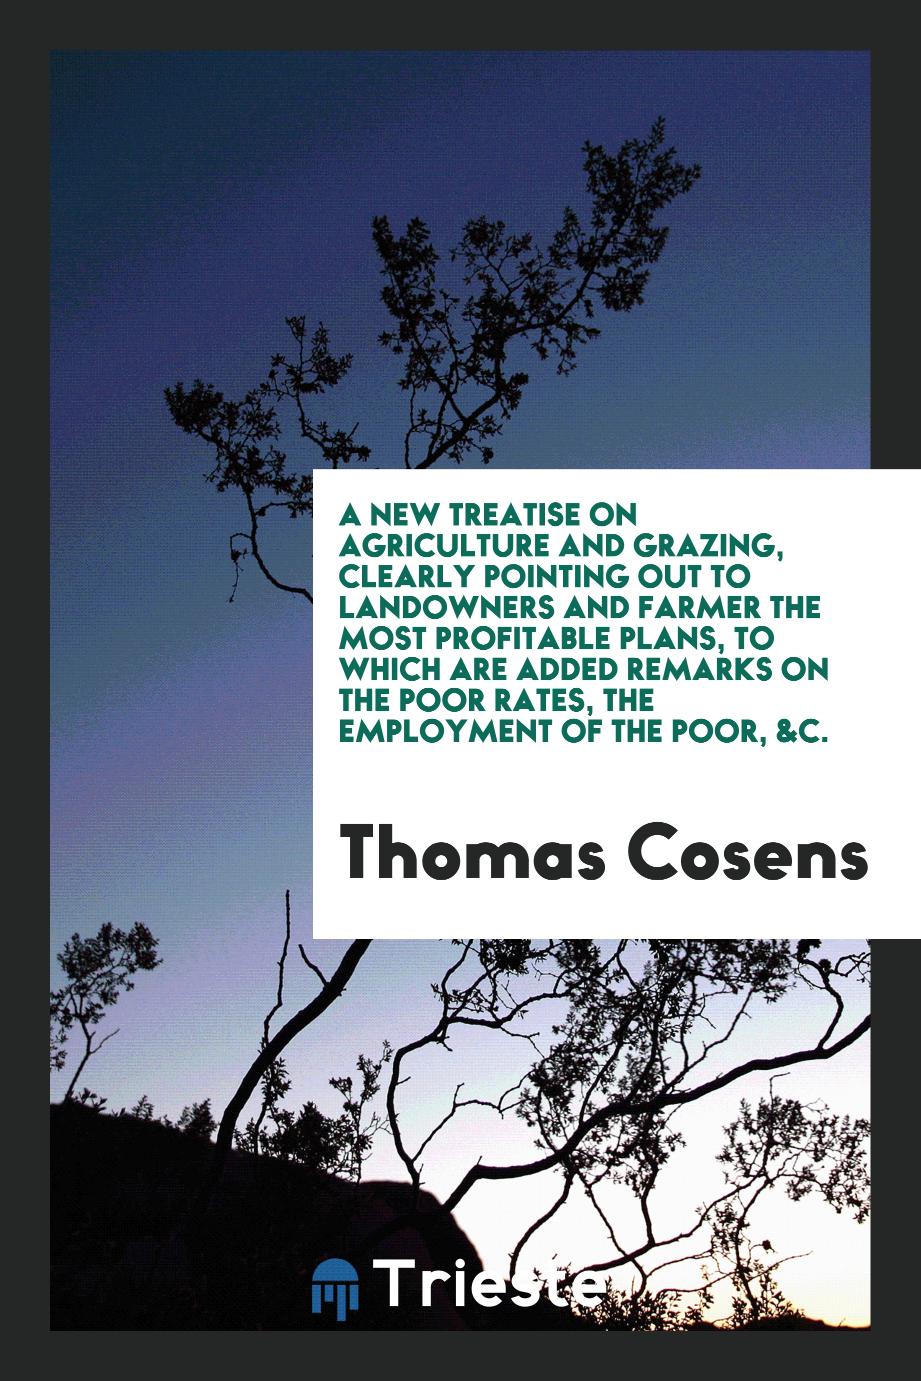 A new treatise on agriculture and grazing, clearly pointing out to landowners and farmer the most profitable plans, to which are added remarks on the poor rates, the employment of the poor, &c.